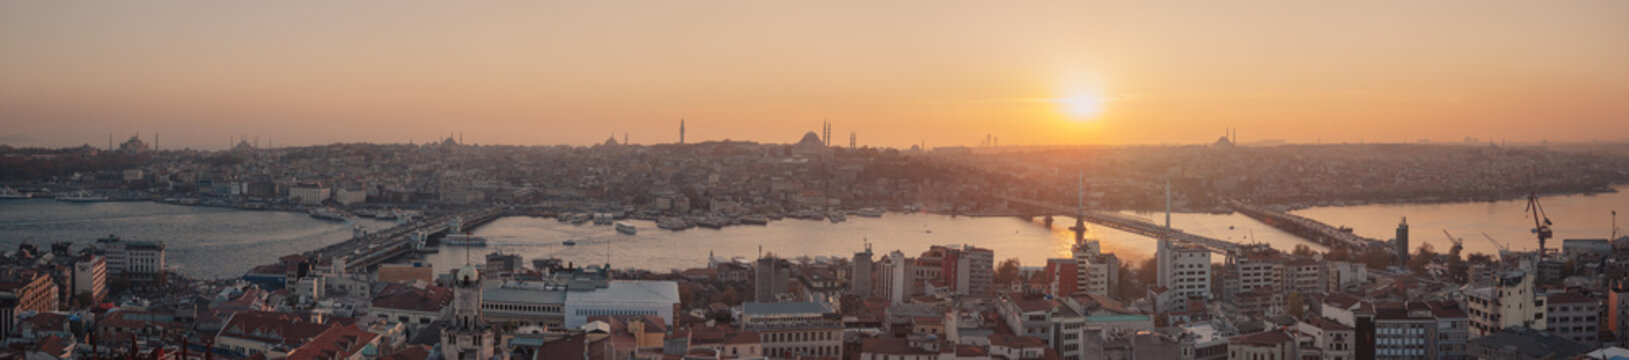 Istanbul sunset panorama - Turkey travel background. Extra wide panoramic photo of Istanbul, Turkey. Autumn cityscape with Golden Horn, shot taken from the viewpoint of Galata tower